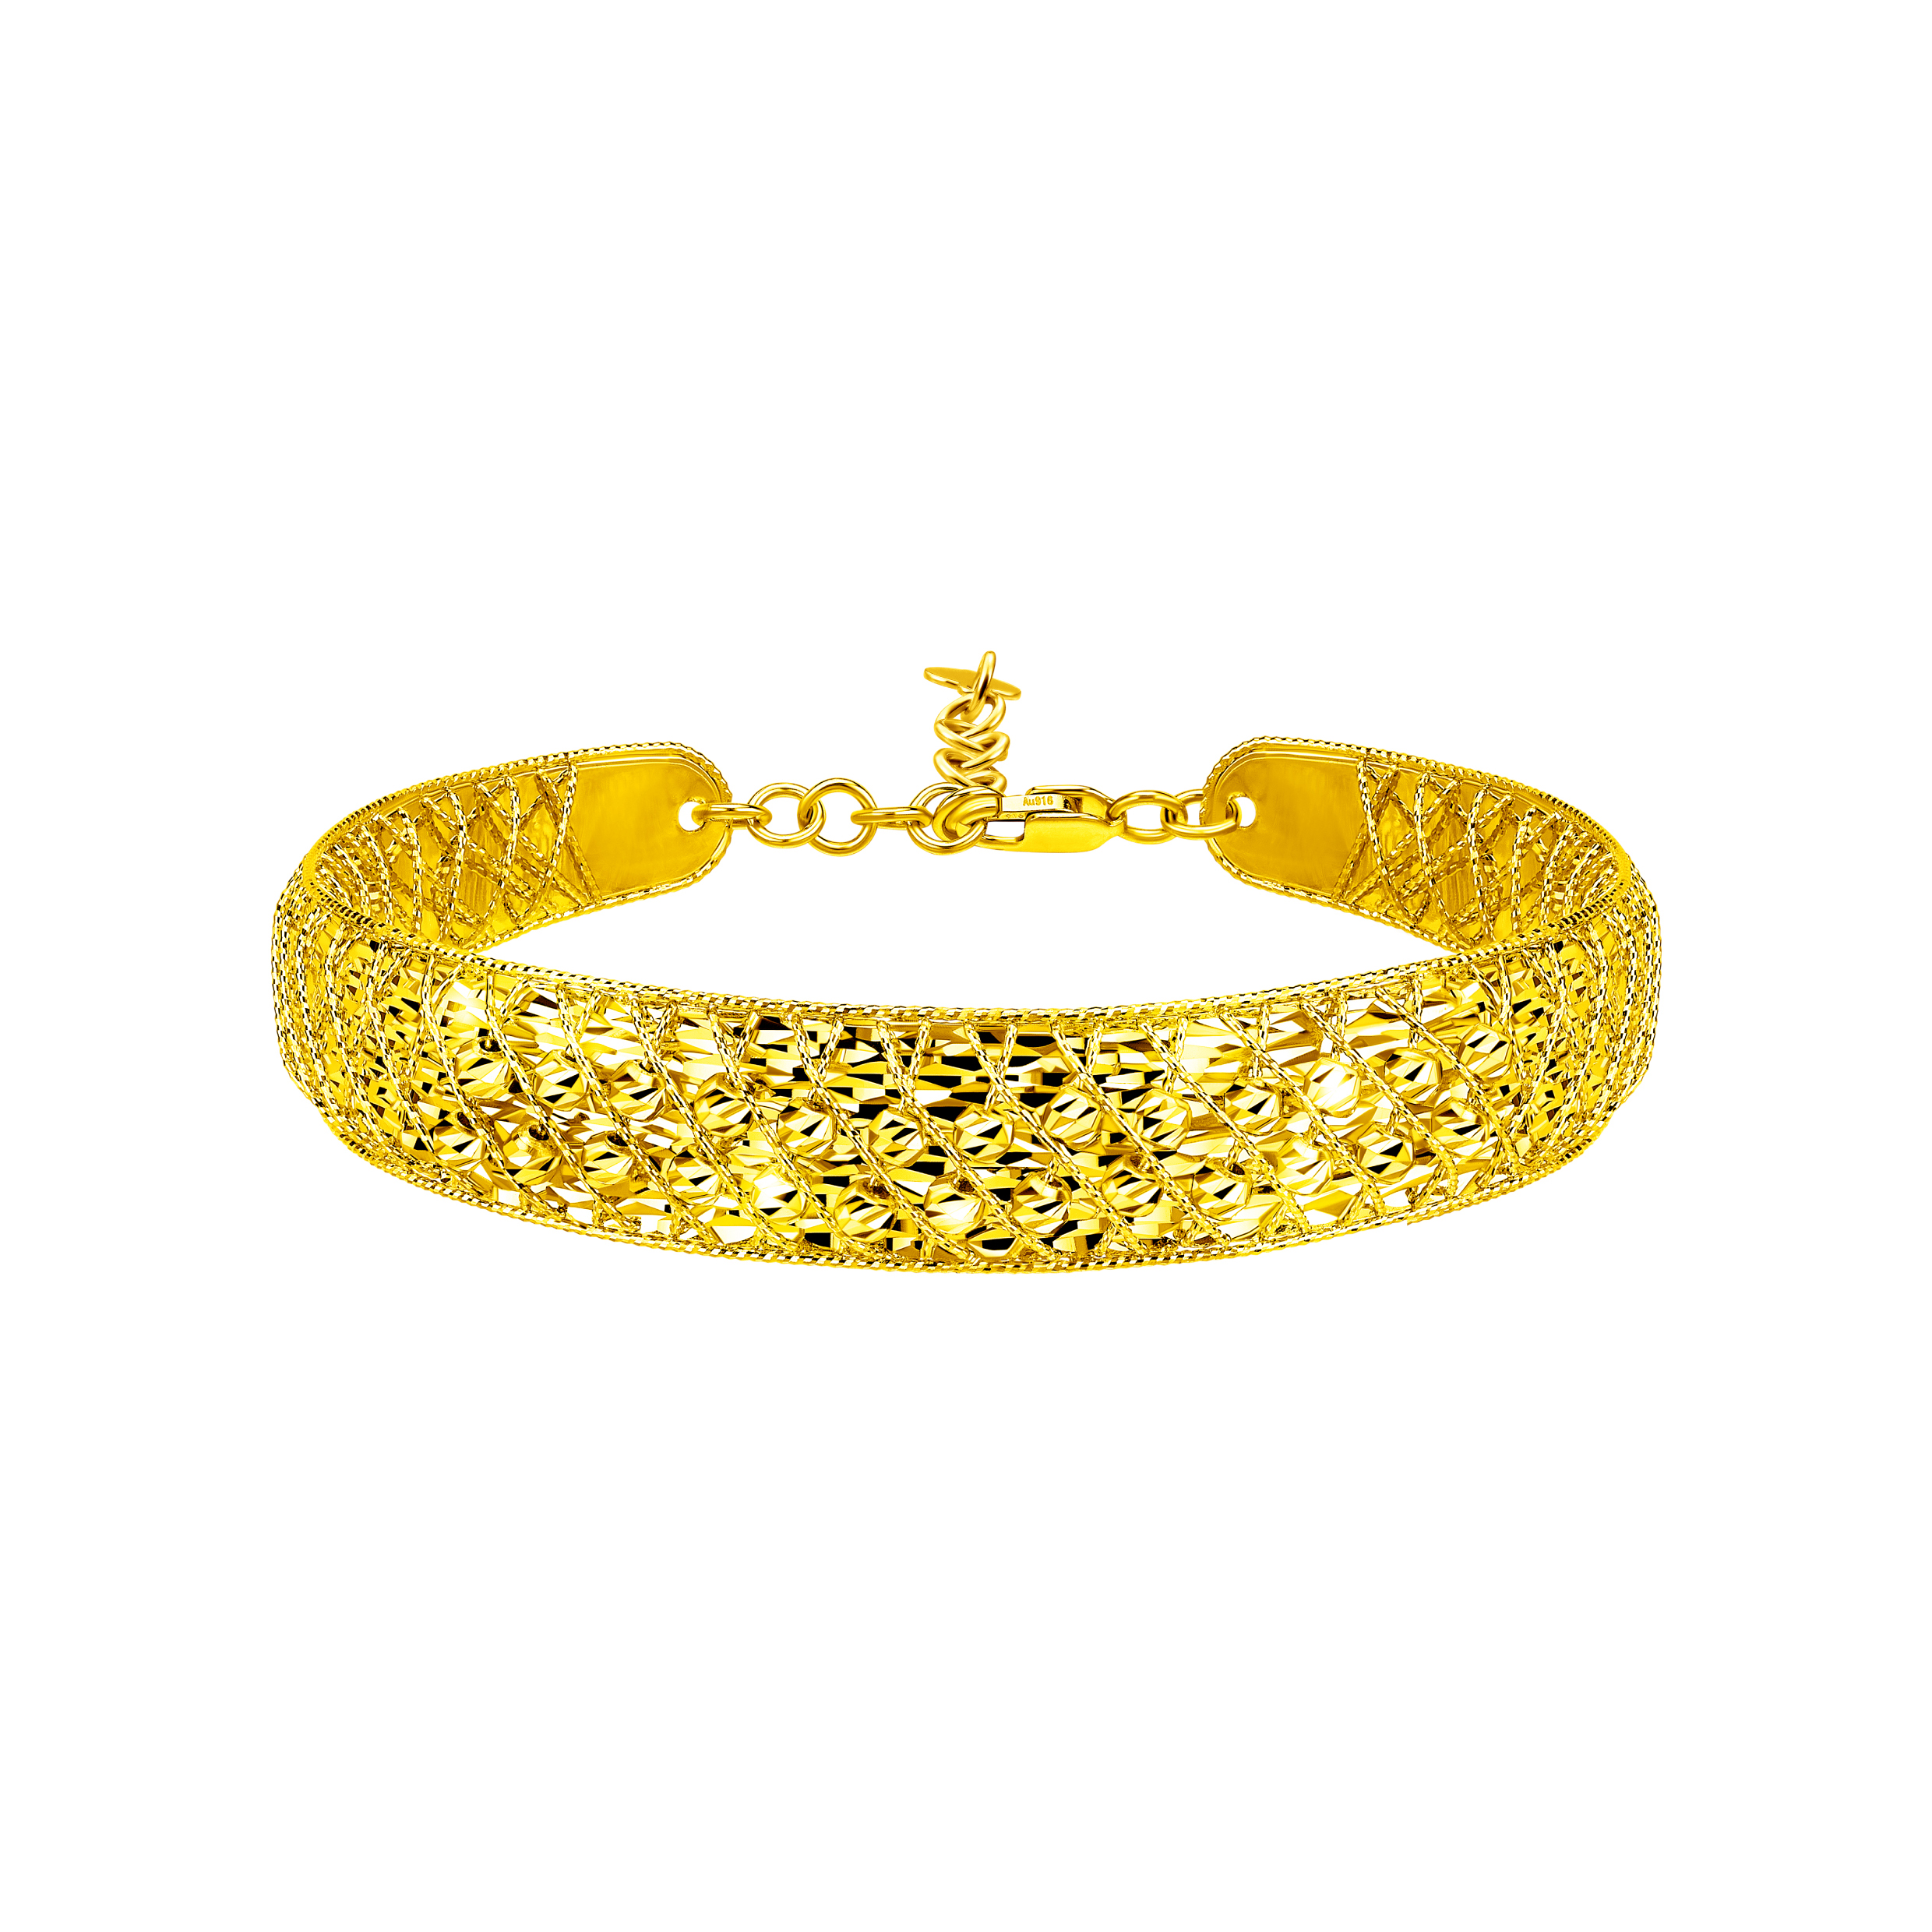 Goldstyle "Starry" Gold Bangle